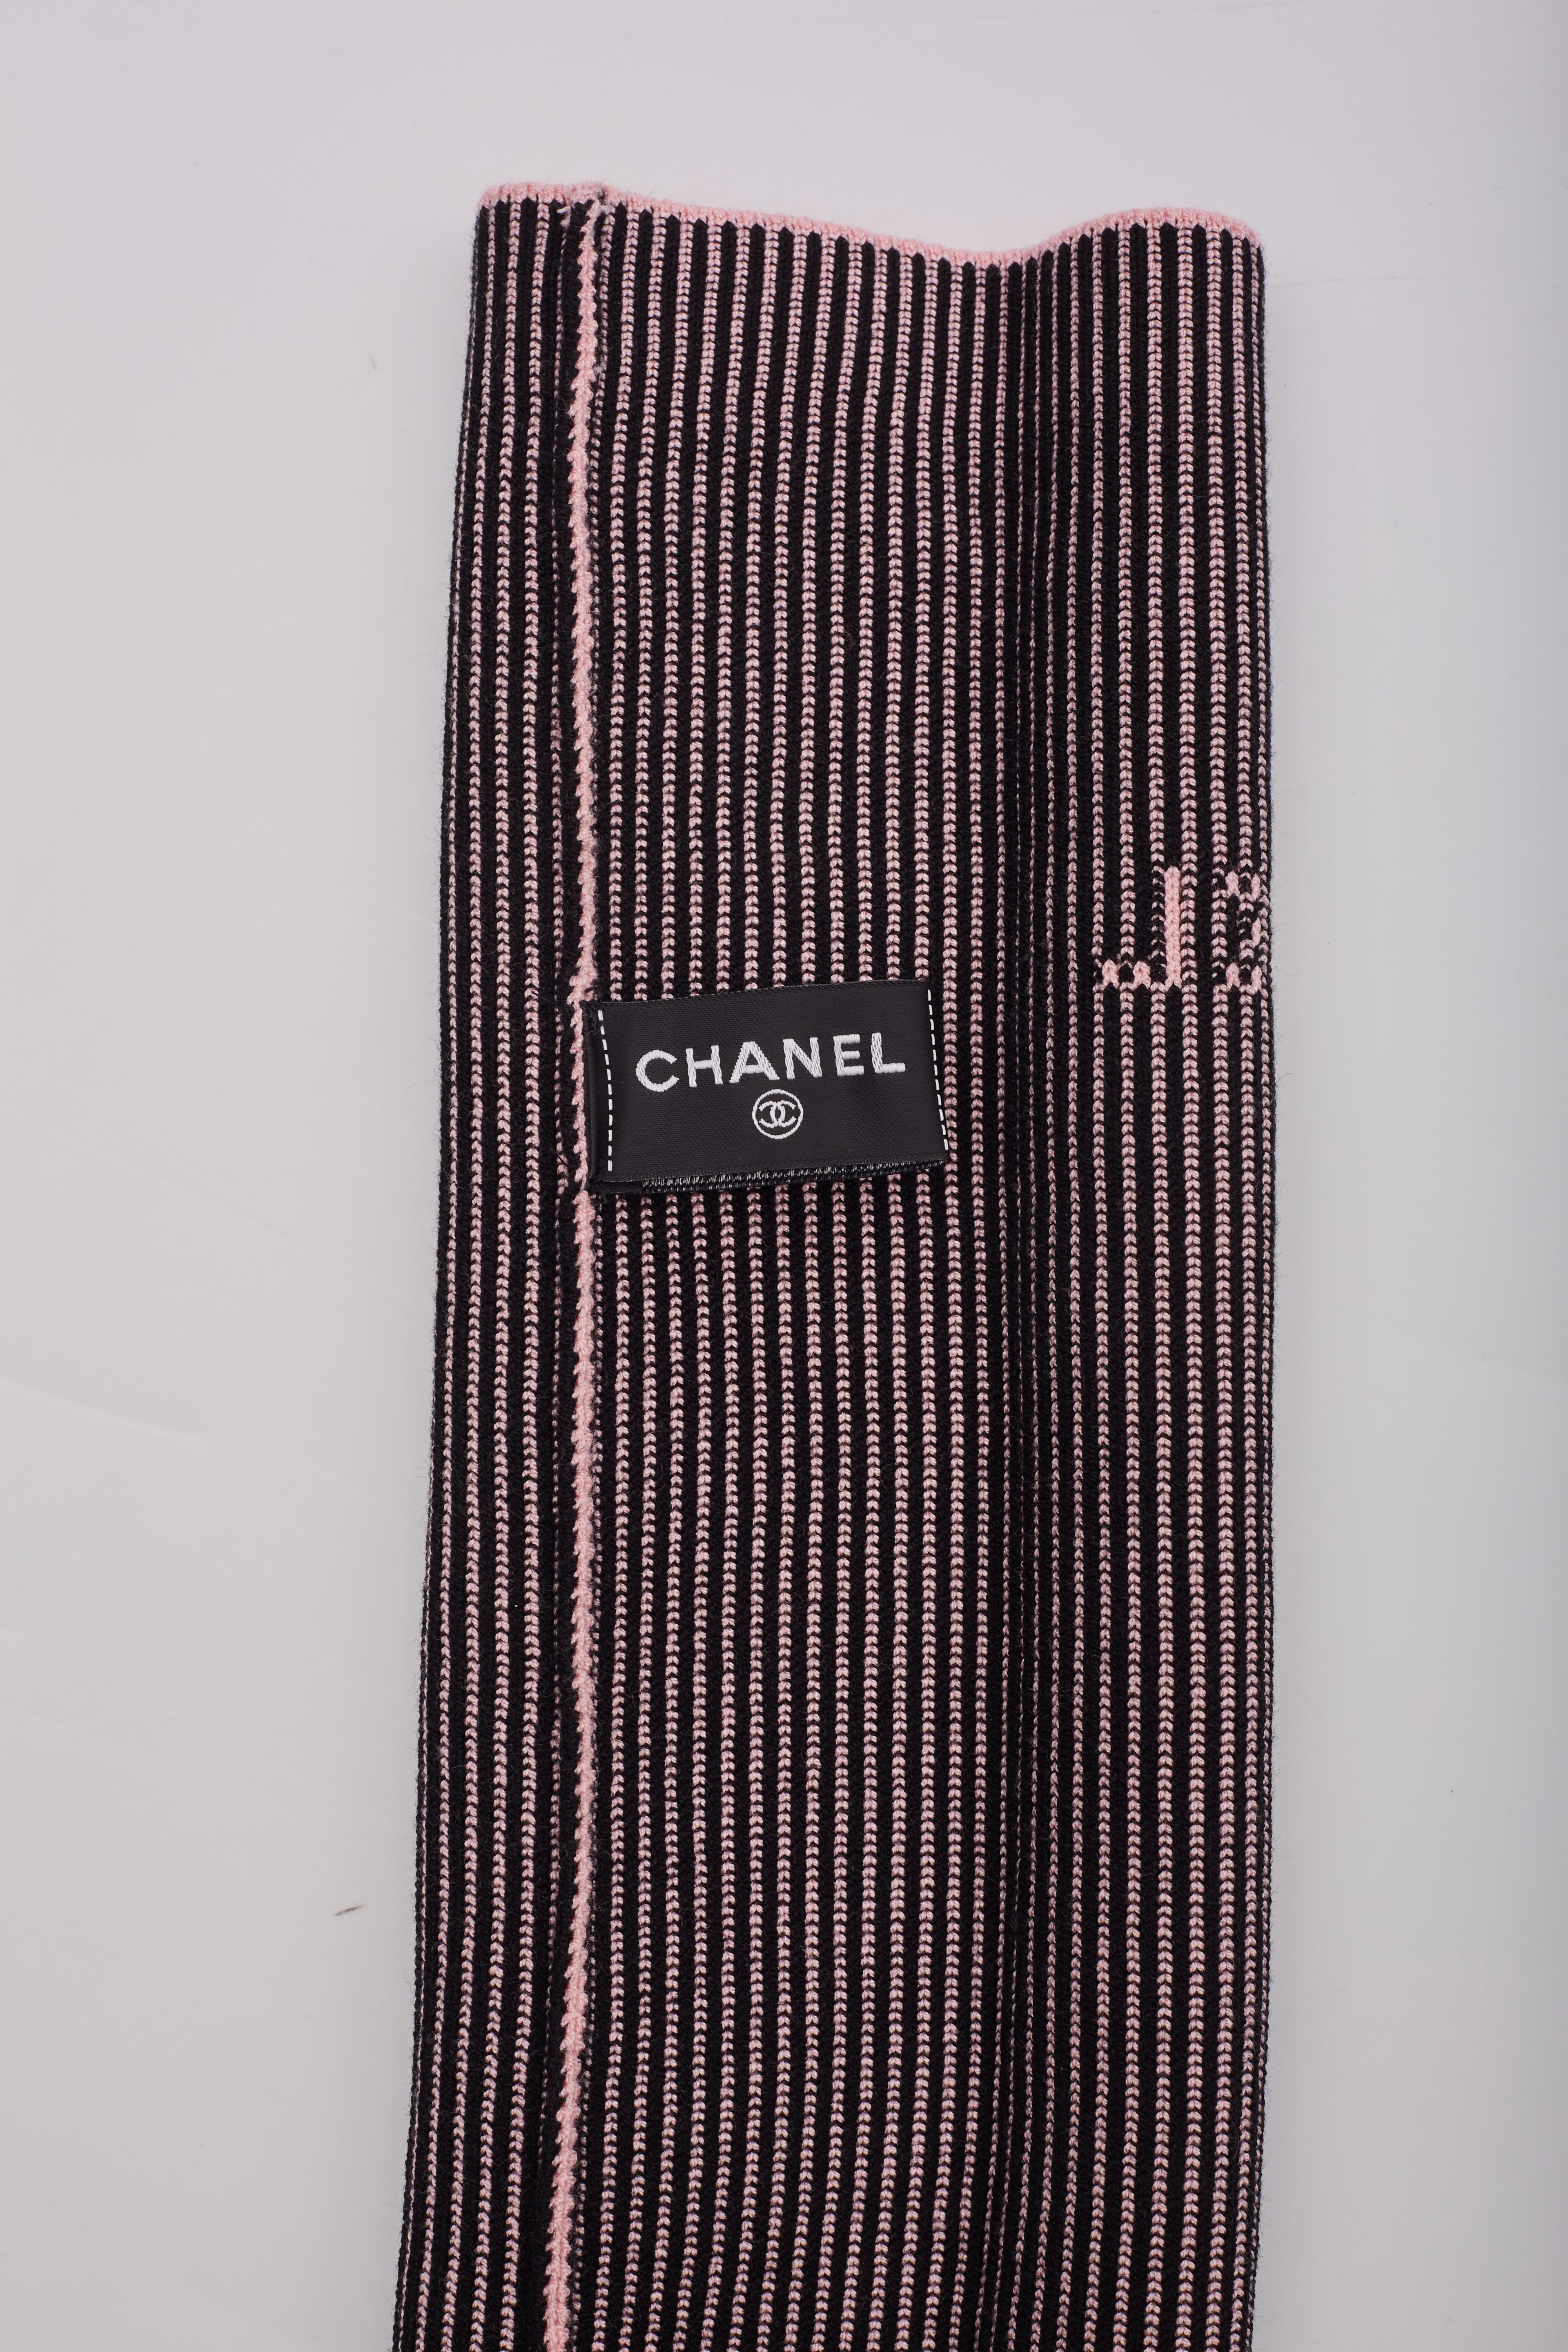 Chanel Logo Pink Knit Leg Warmers Gaiters For Sale 3